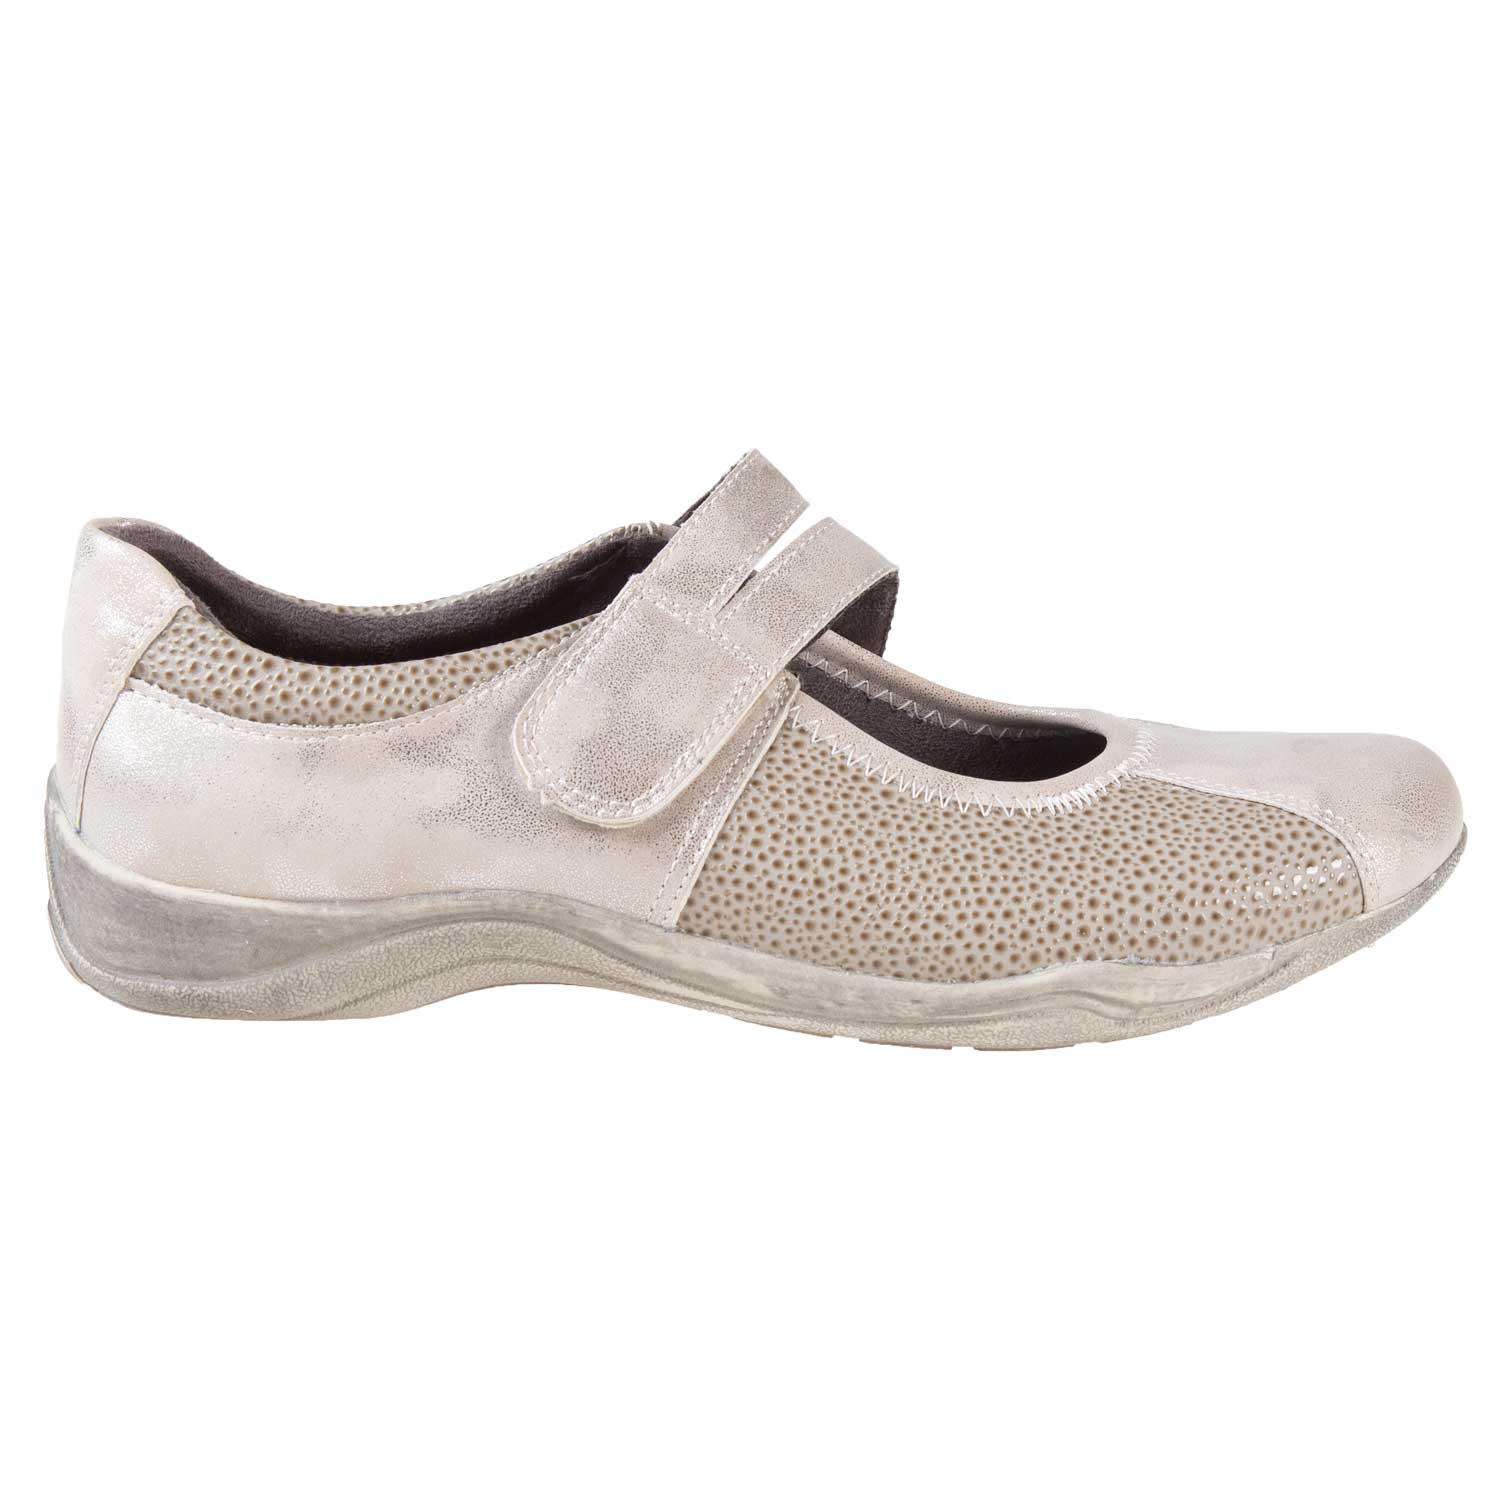 Women's round toe slip-on sports shoes with velcro closure, size 8